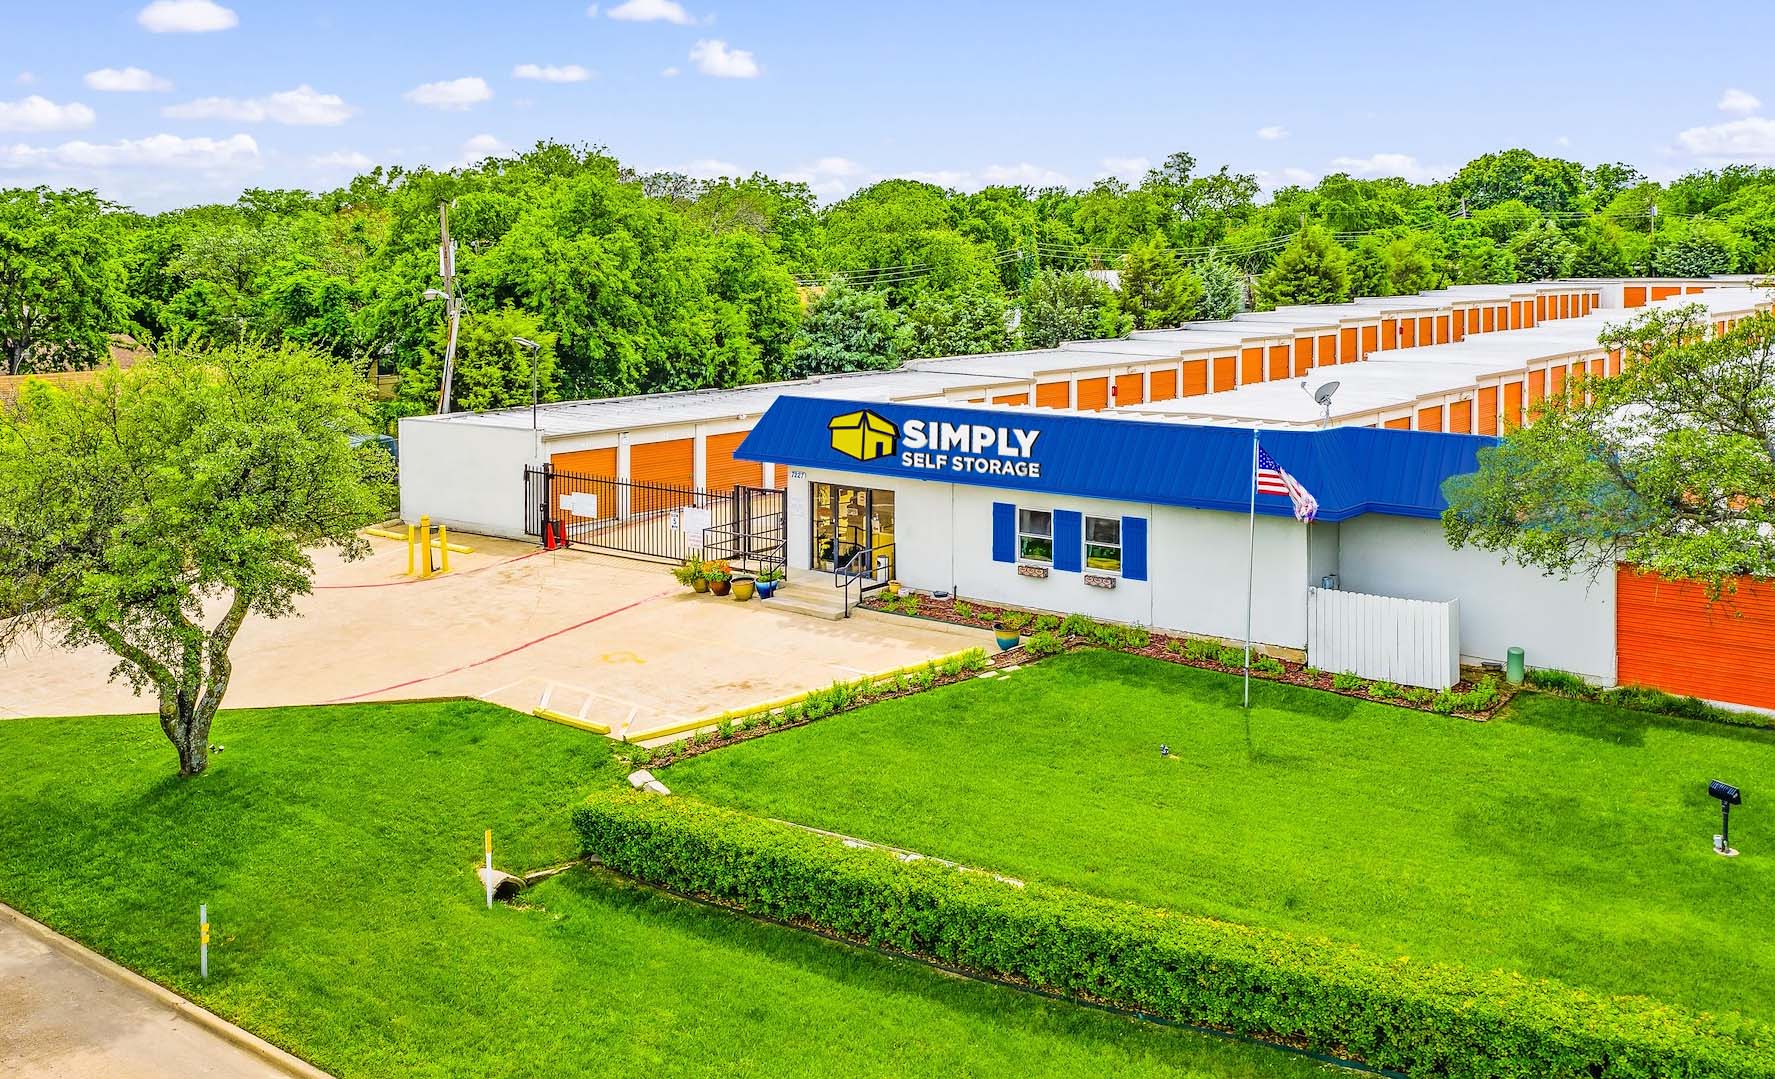 Simply Self Storage facility expanding locations in Dallas